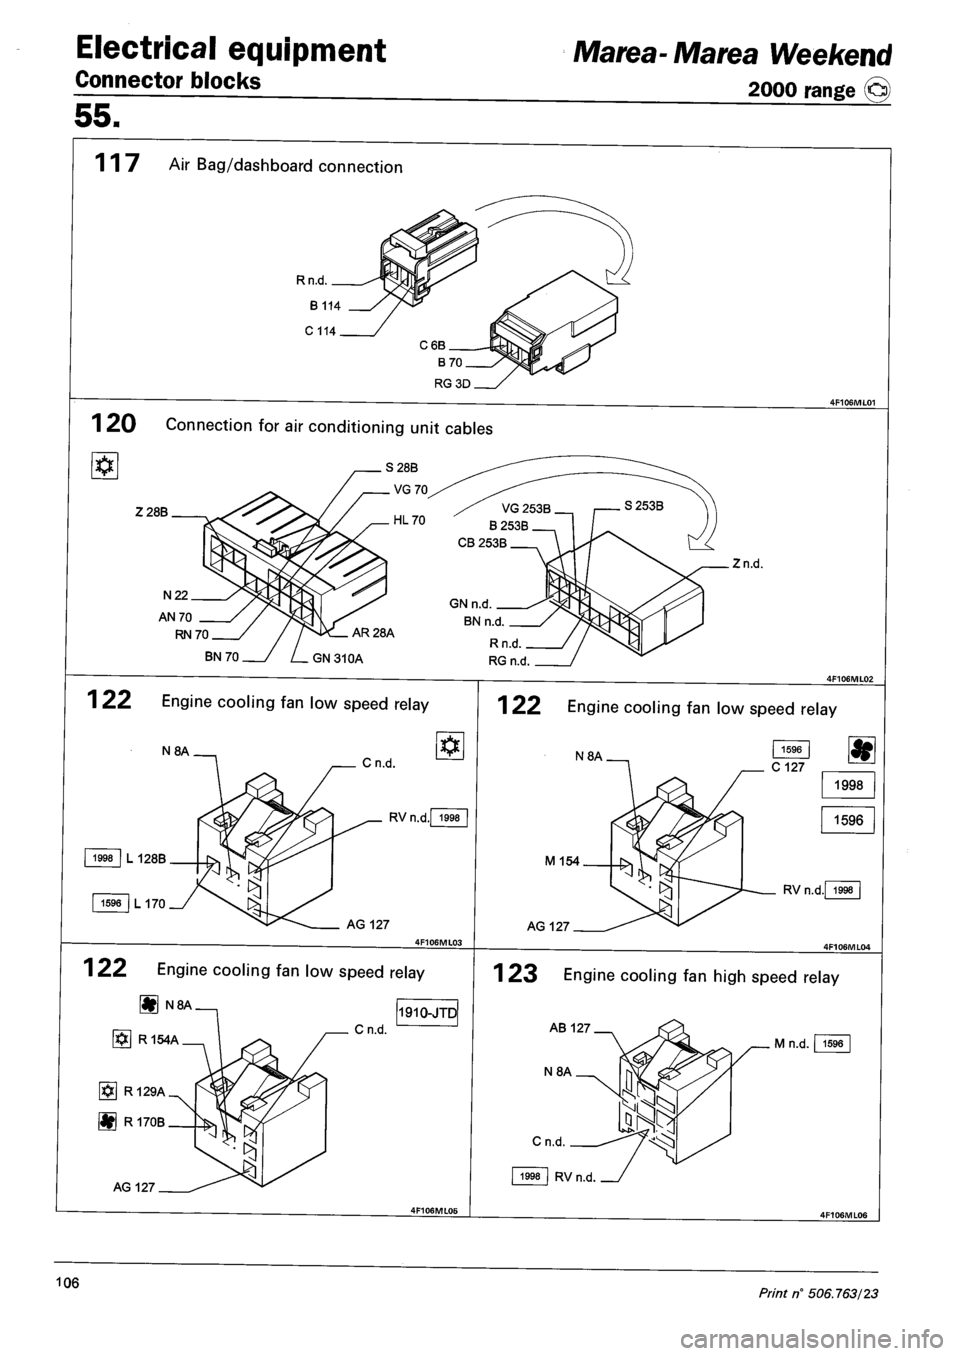 FIAT MAREA 2000 1.G Workshop Manual Electrical equipment 
Connector blocks 
Marea- Marea Weekend 
2000 range © 
55. 
117 Air Bag/dashboard connection 
Rn.d 
1 20 Connection for air conditioning unit cables 
Z28B 
Zn.d. 
N22 
AN 70 
RN 